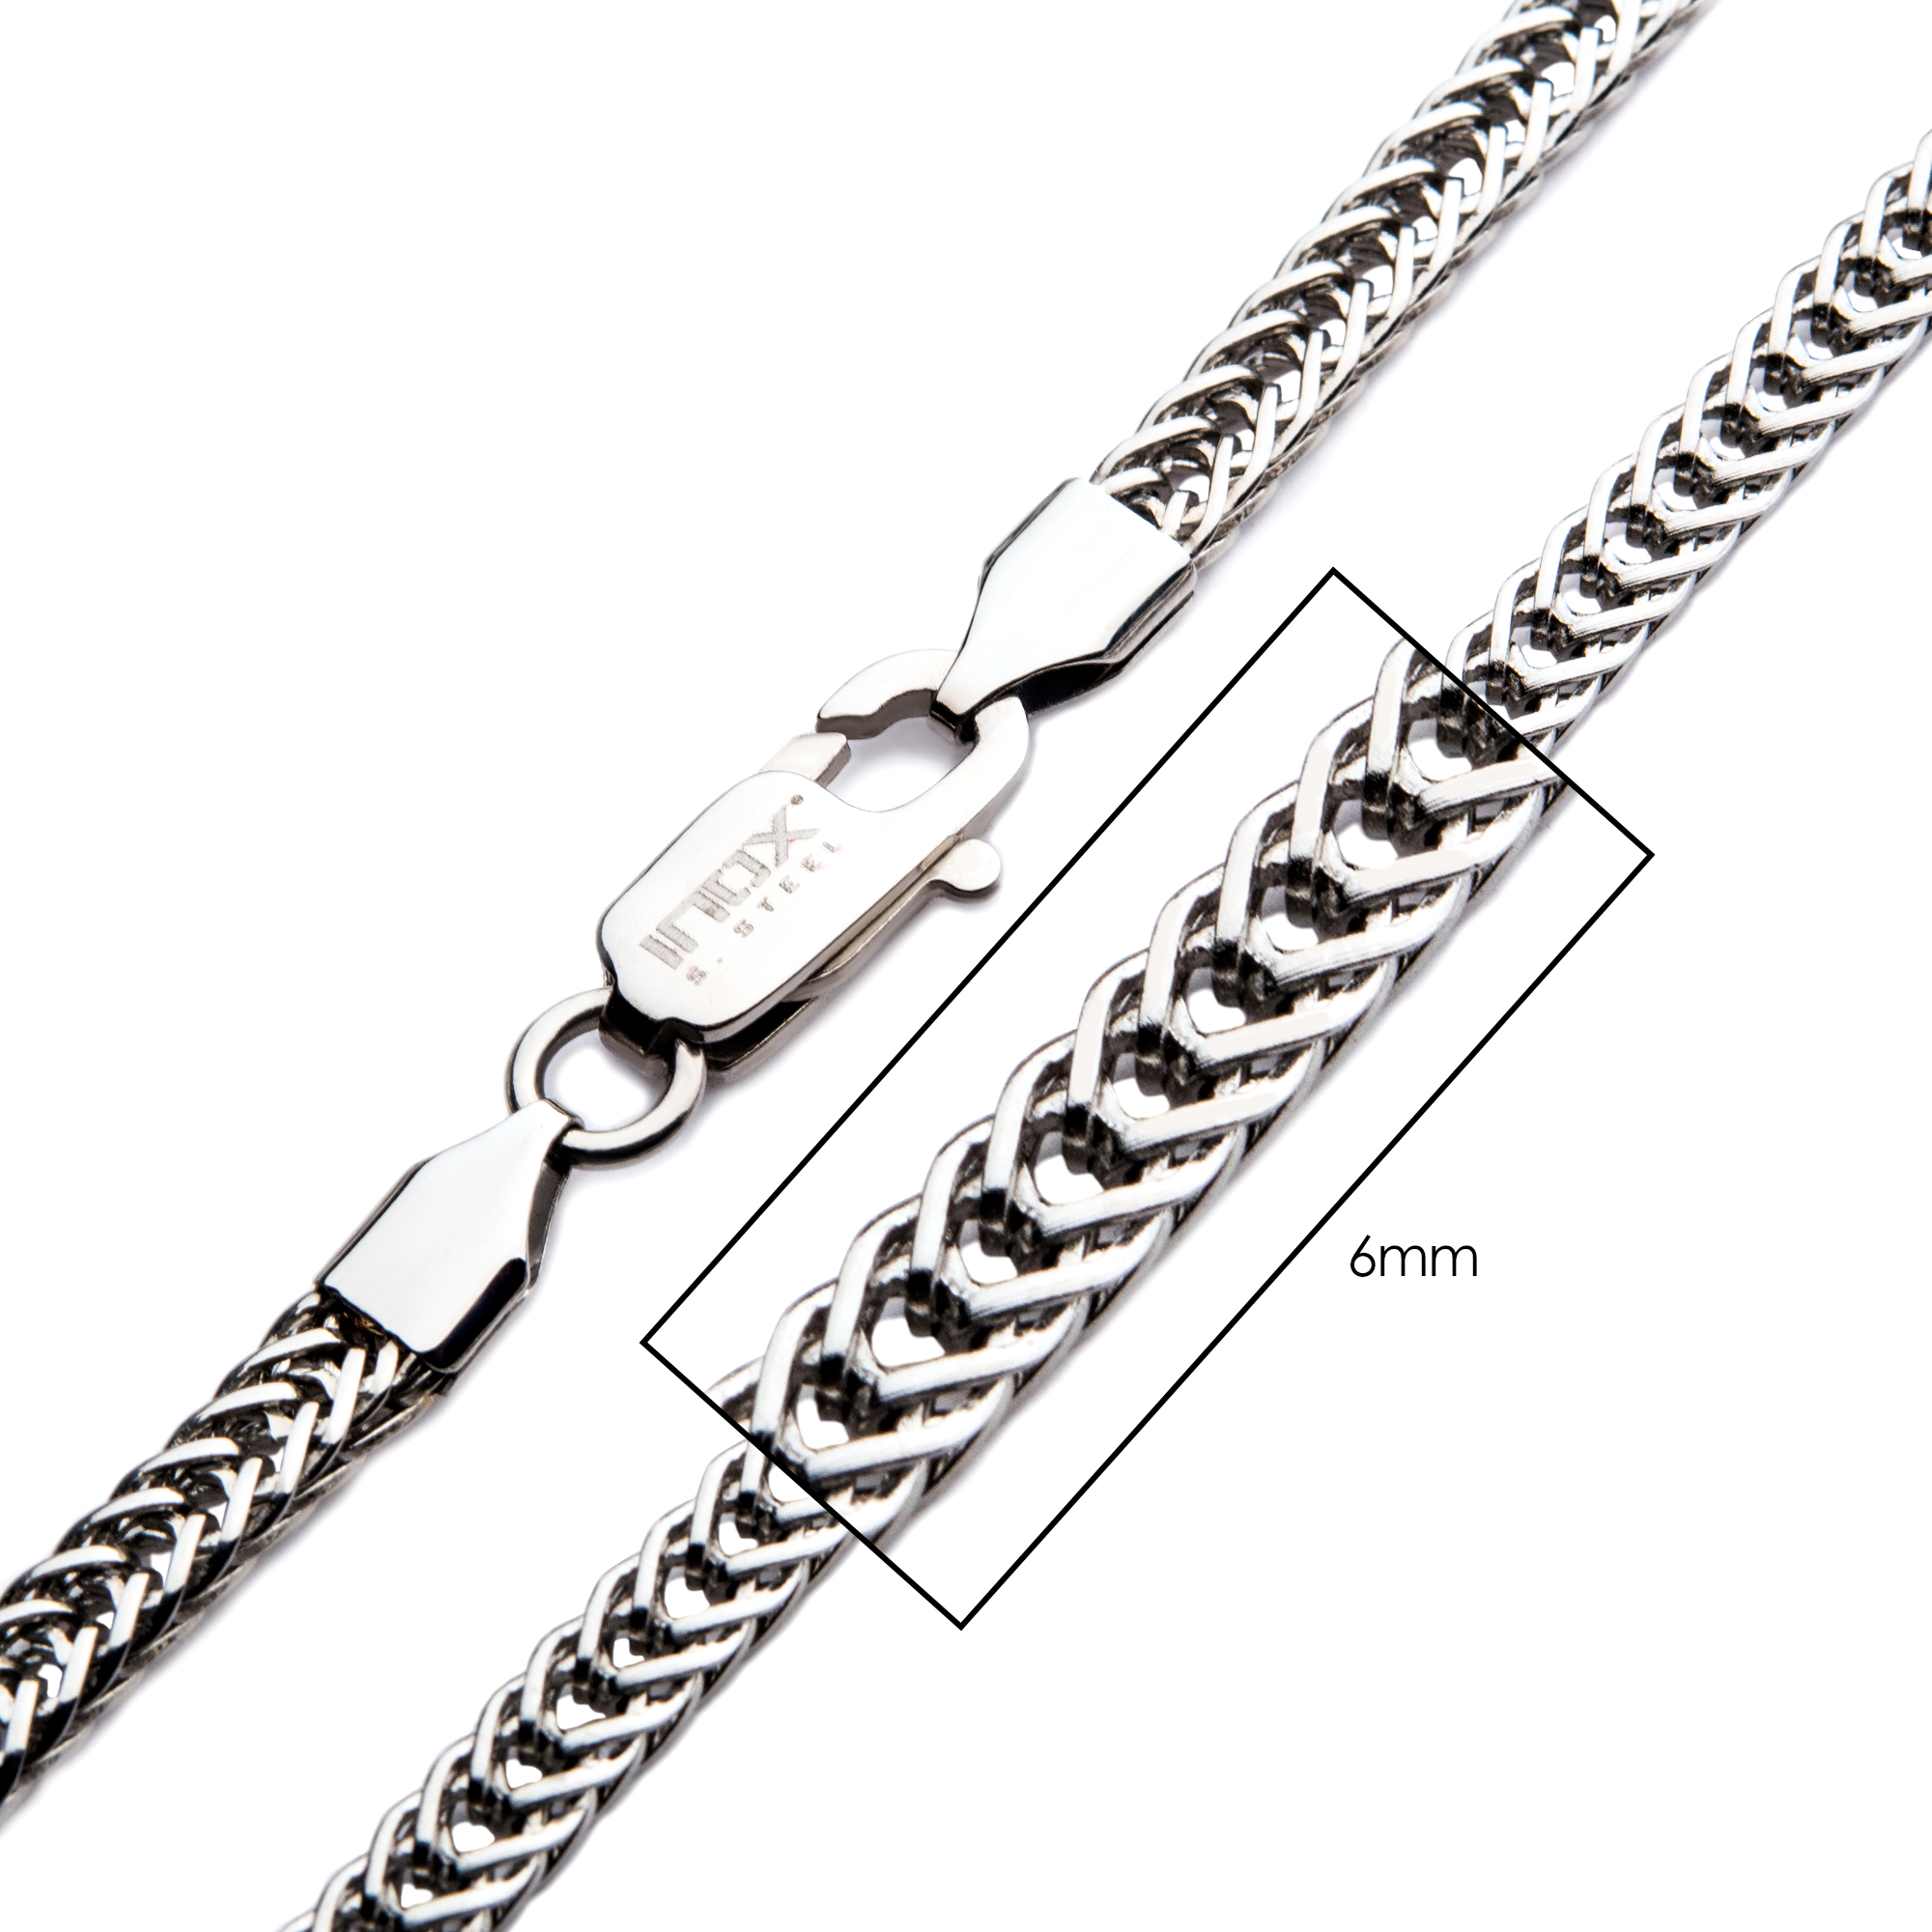 MEN's Stainless Steel 6mm 24" Black And Silver Foxtail Chain Necklace 